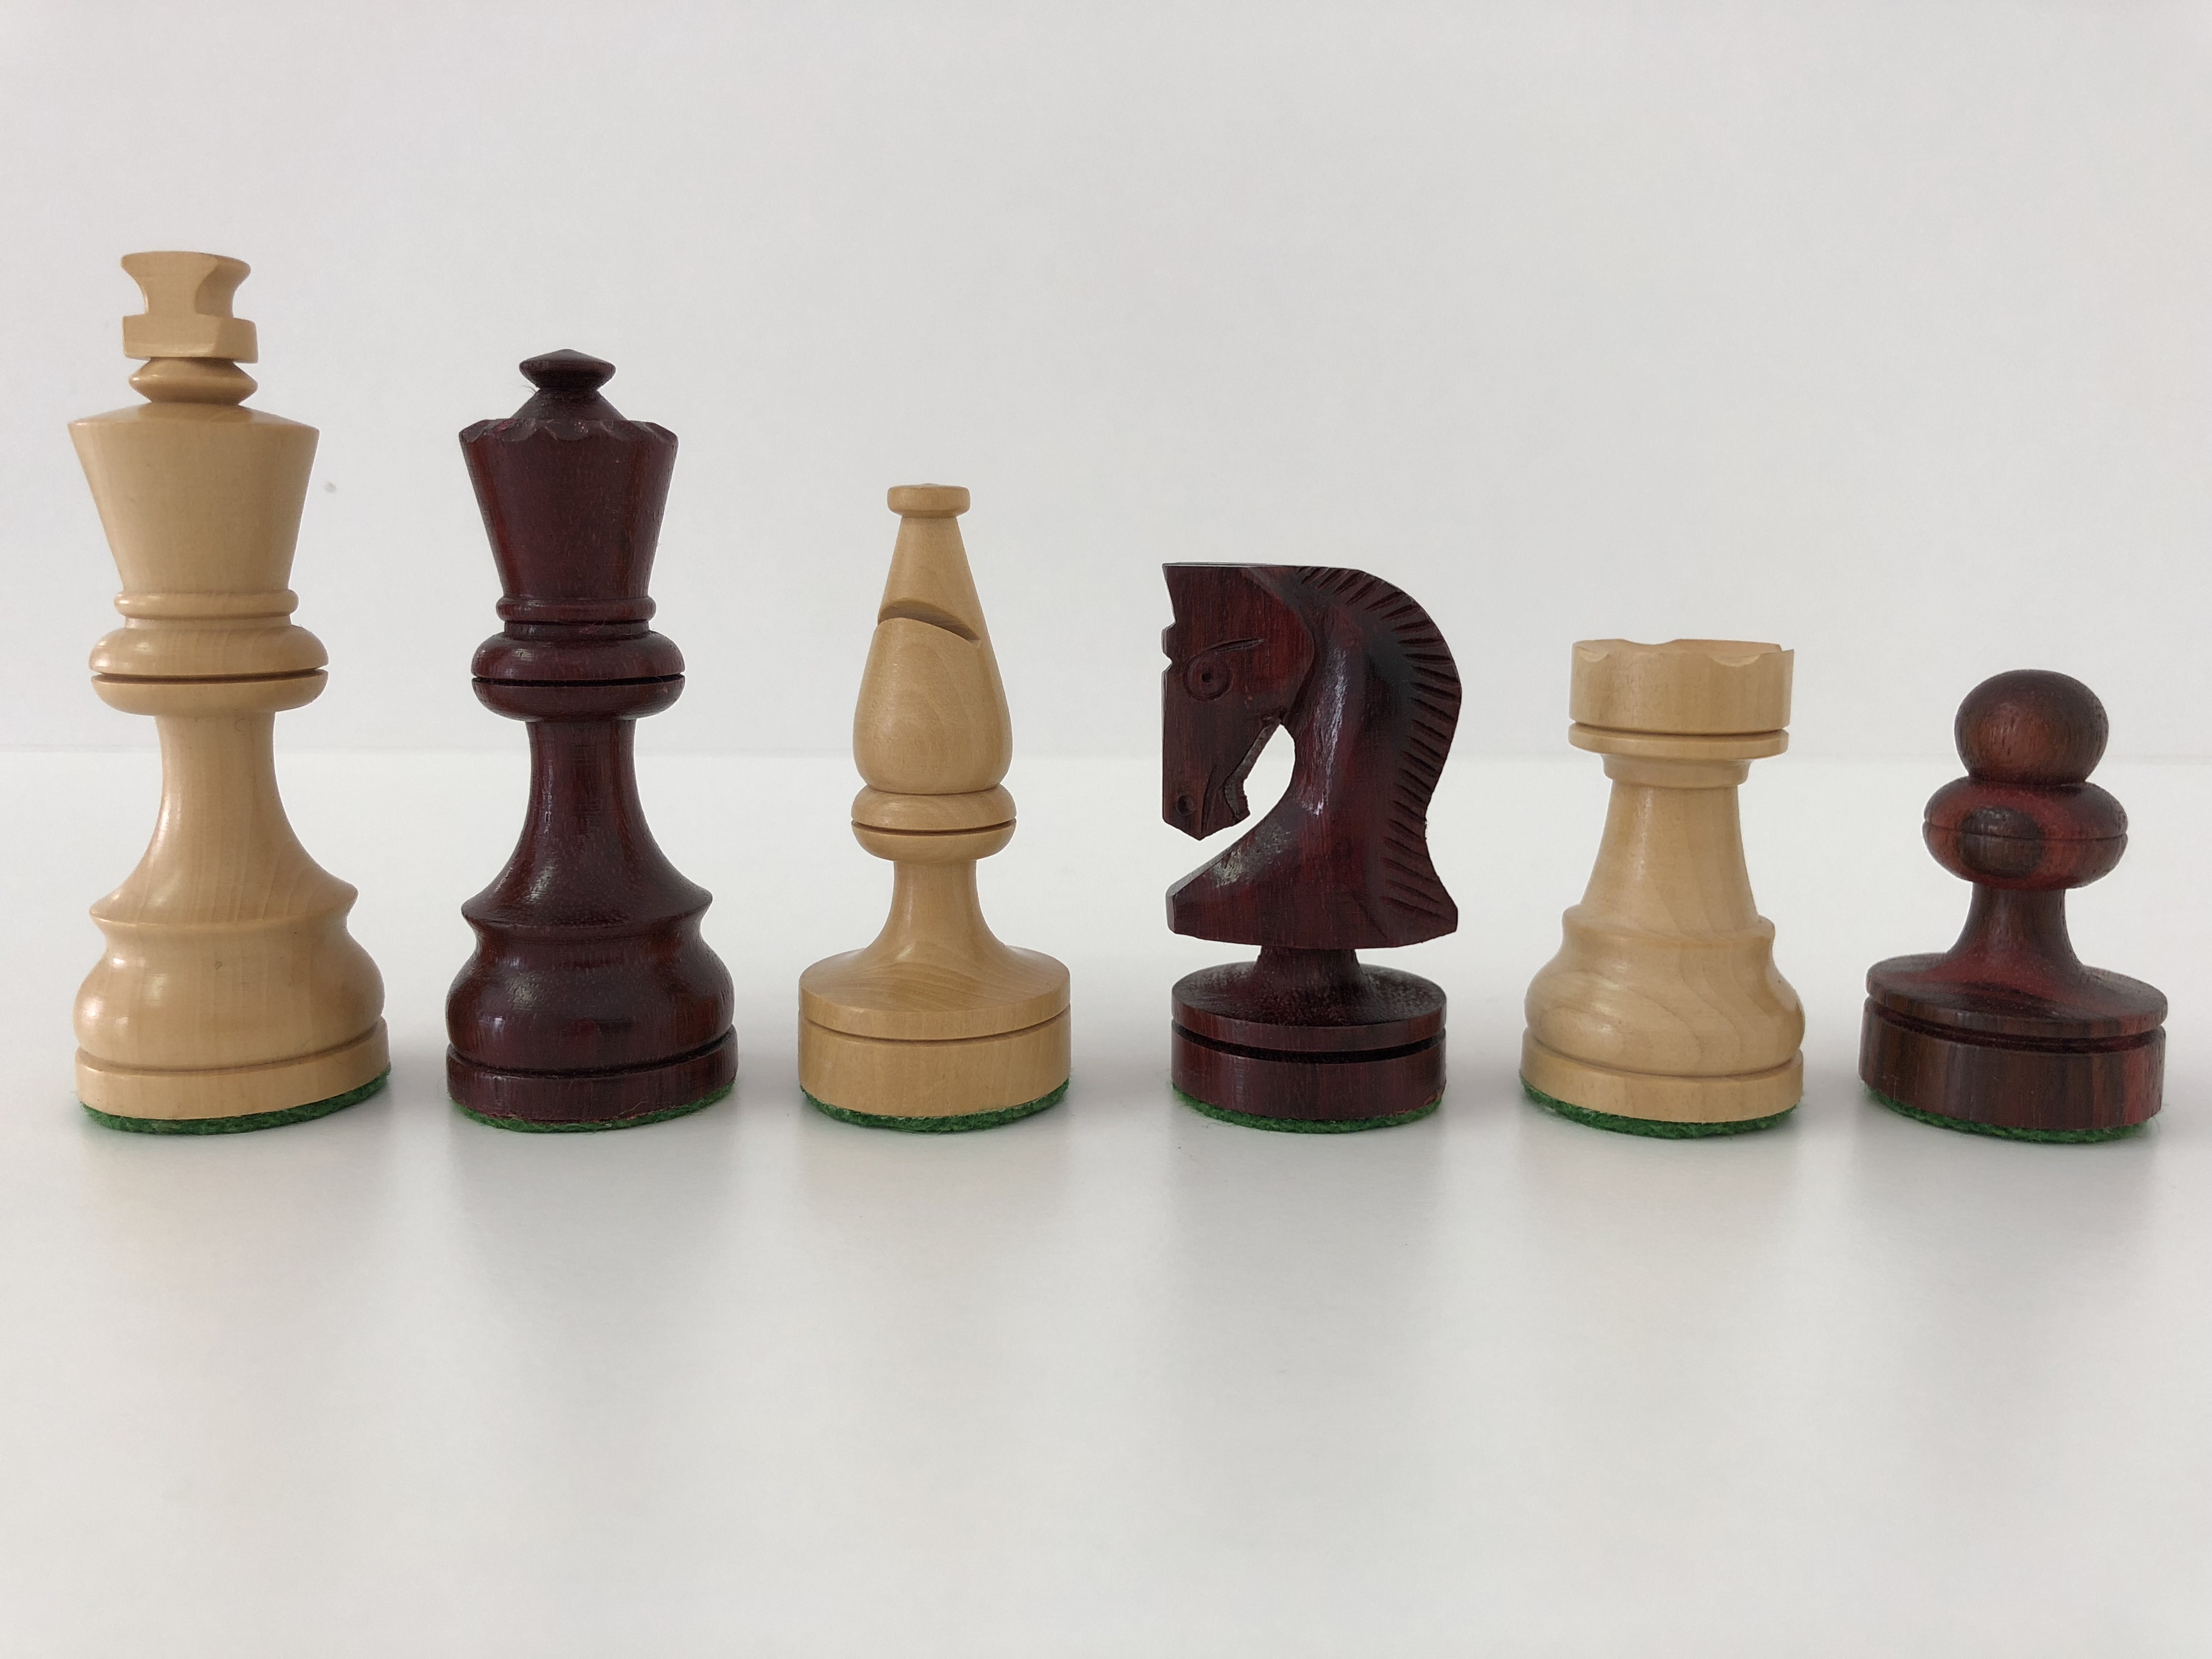 Walnut chessboard with round corners and palissander chess pieces Ulbrich